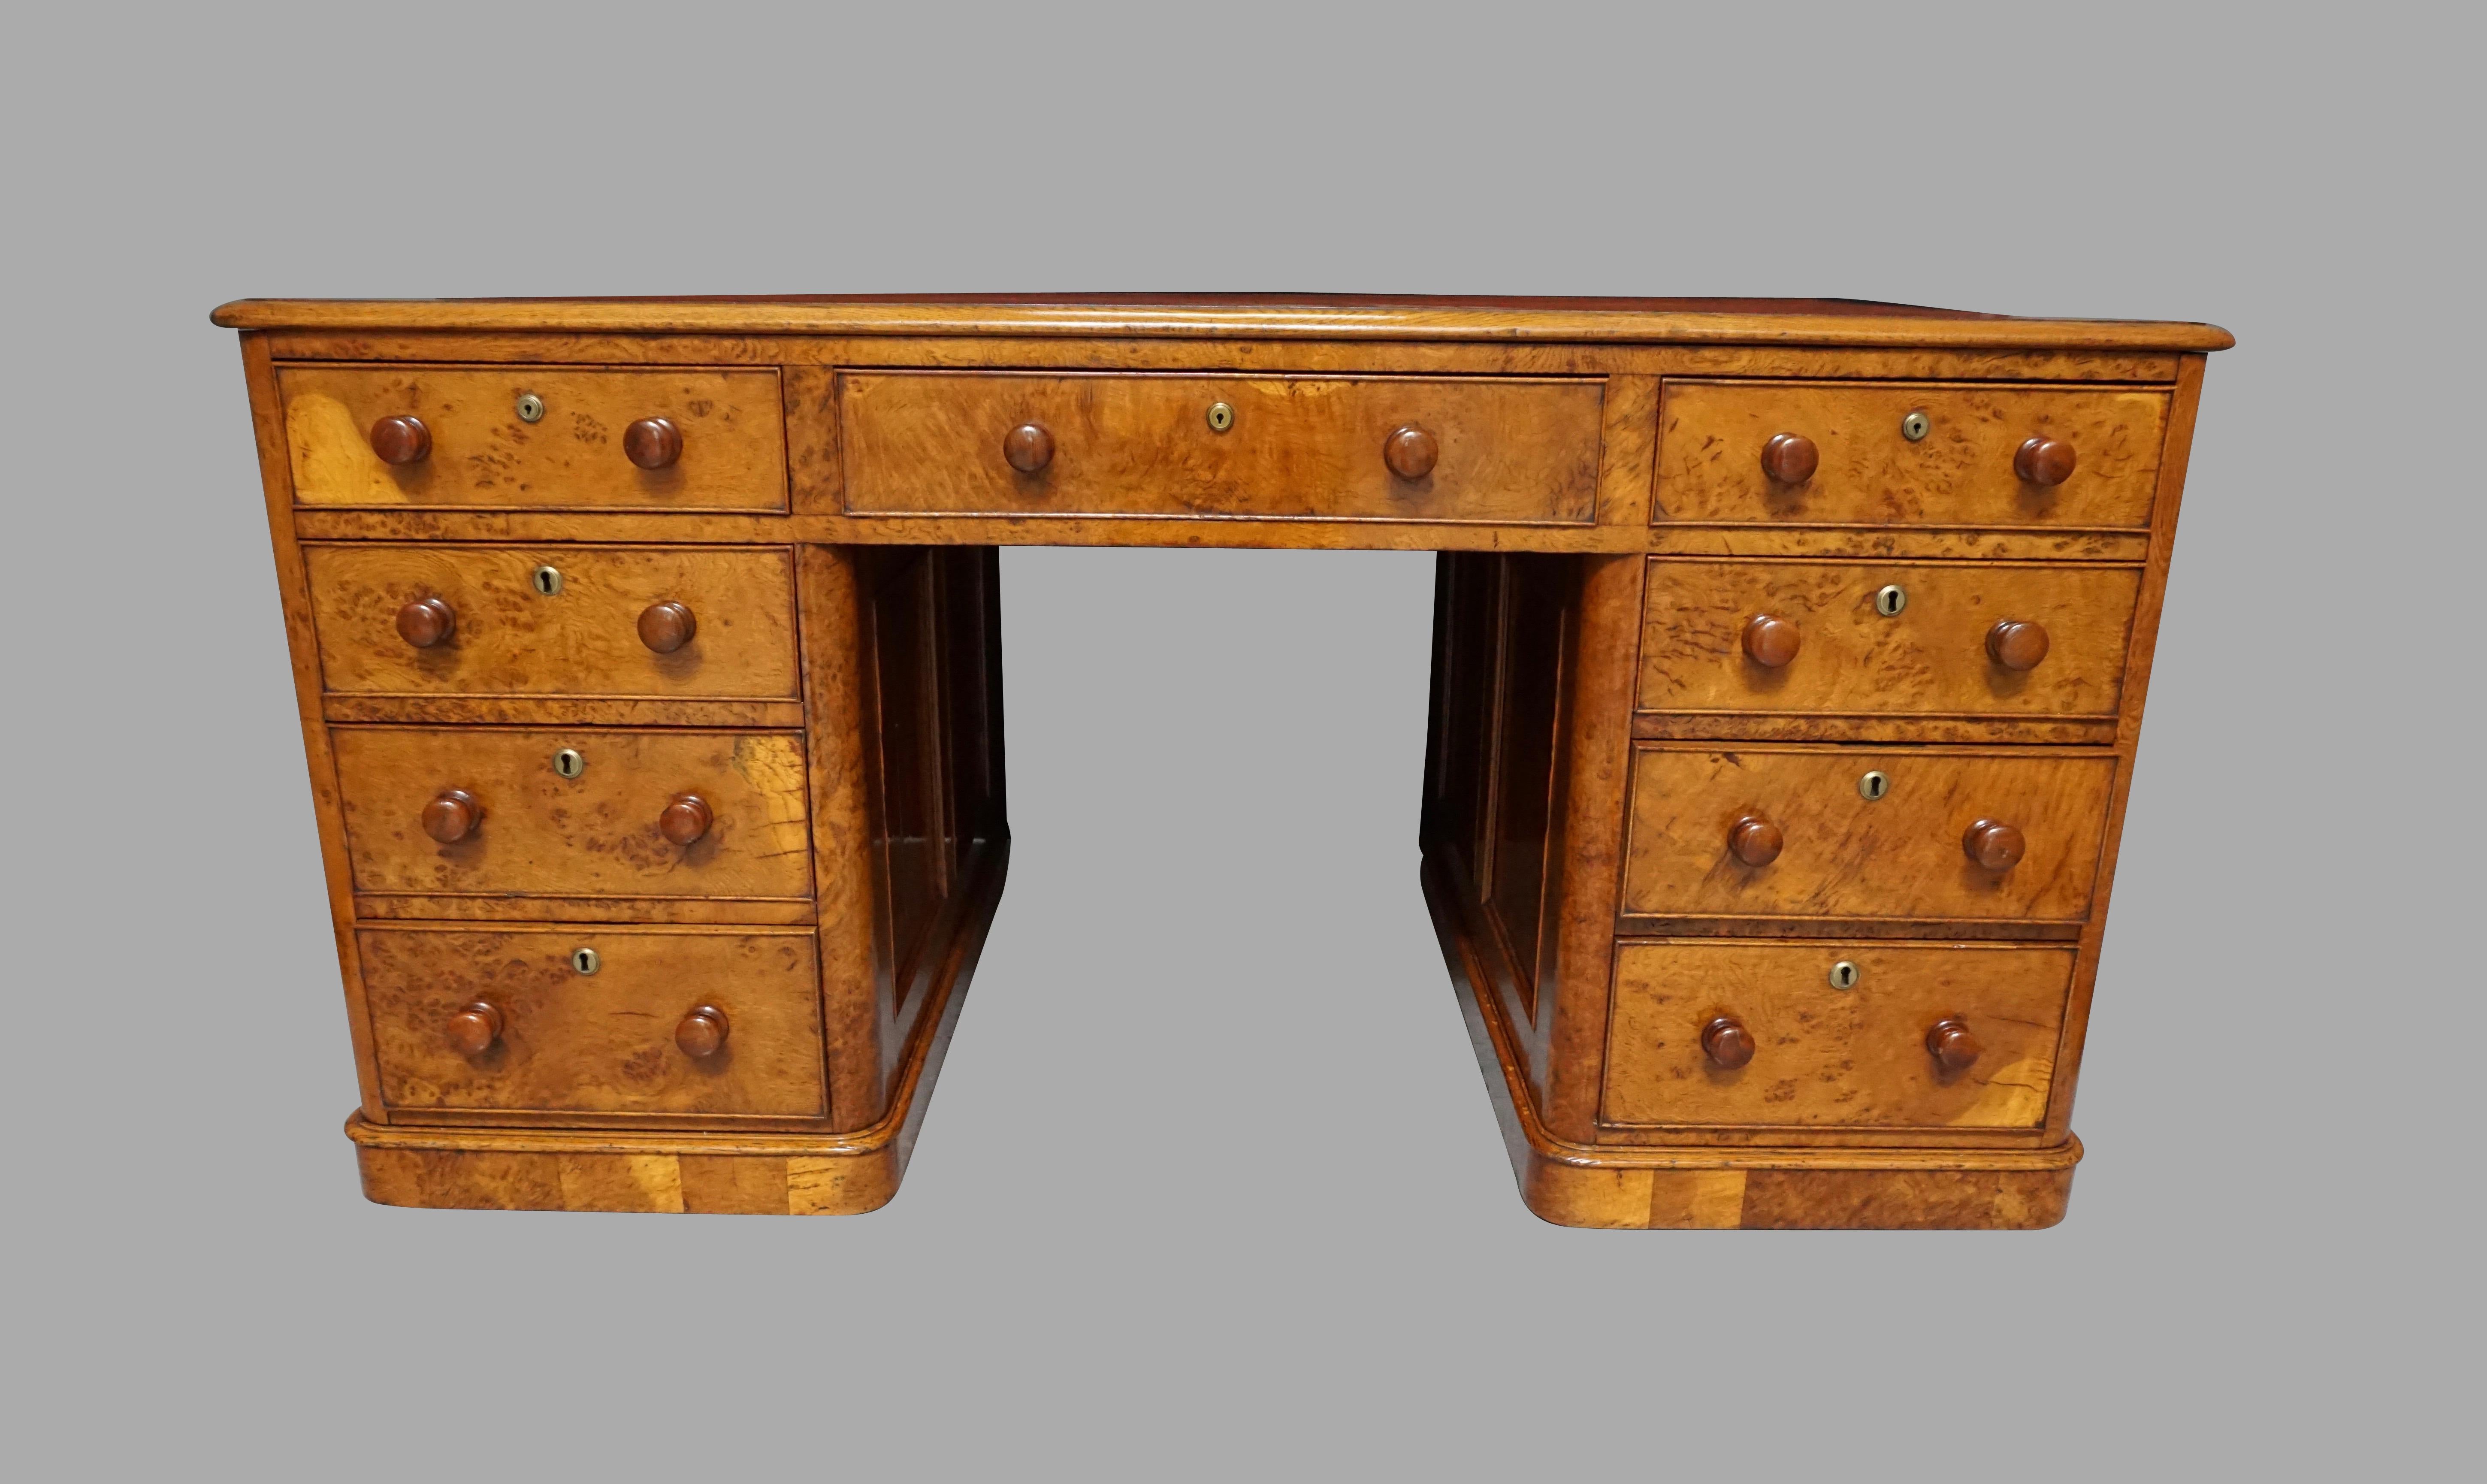 A fine quality one-piece English oak and pollard oak partners desk with beautifully figured burled veneer throughout, the pale coral colored tooled leather top with a molded edge above 2 banks of 4 graduated drawers retaining their original wooden